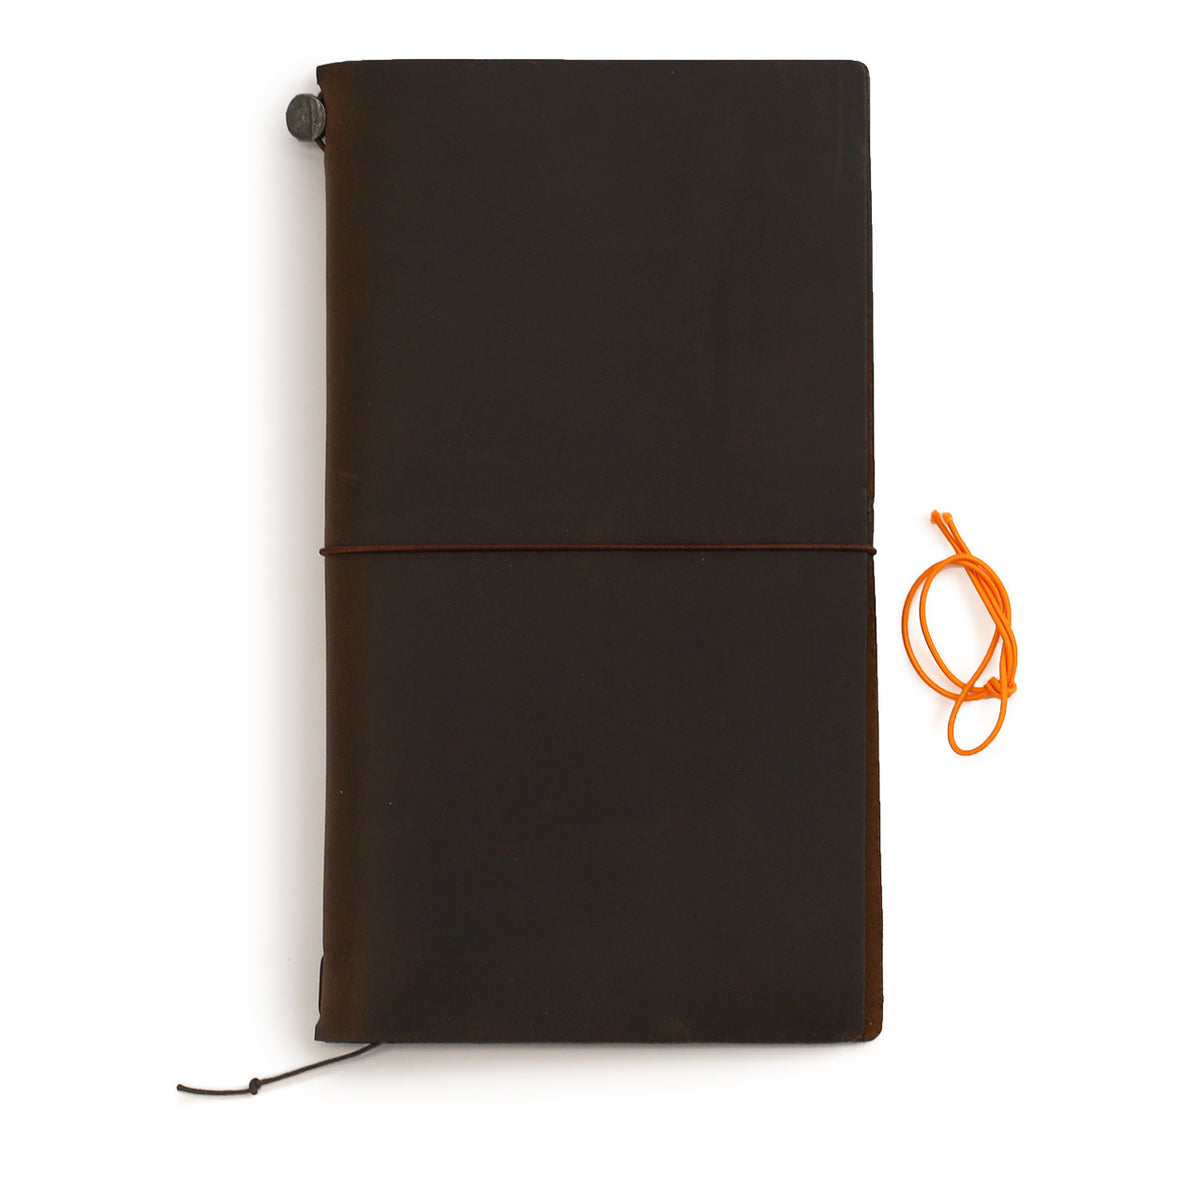 Traveler&#39;s Notebook in brown leather showing the extra orange elastic